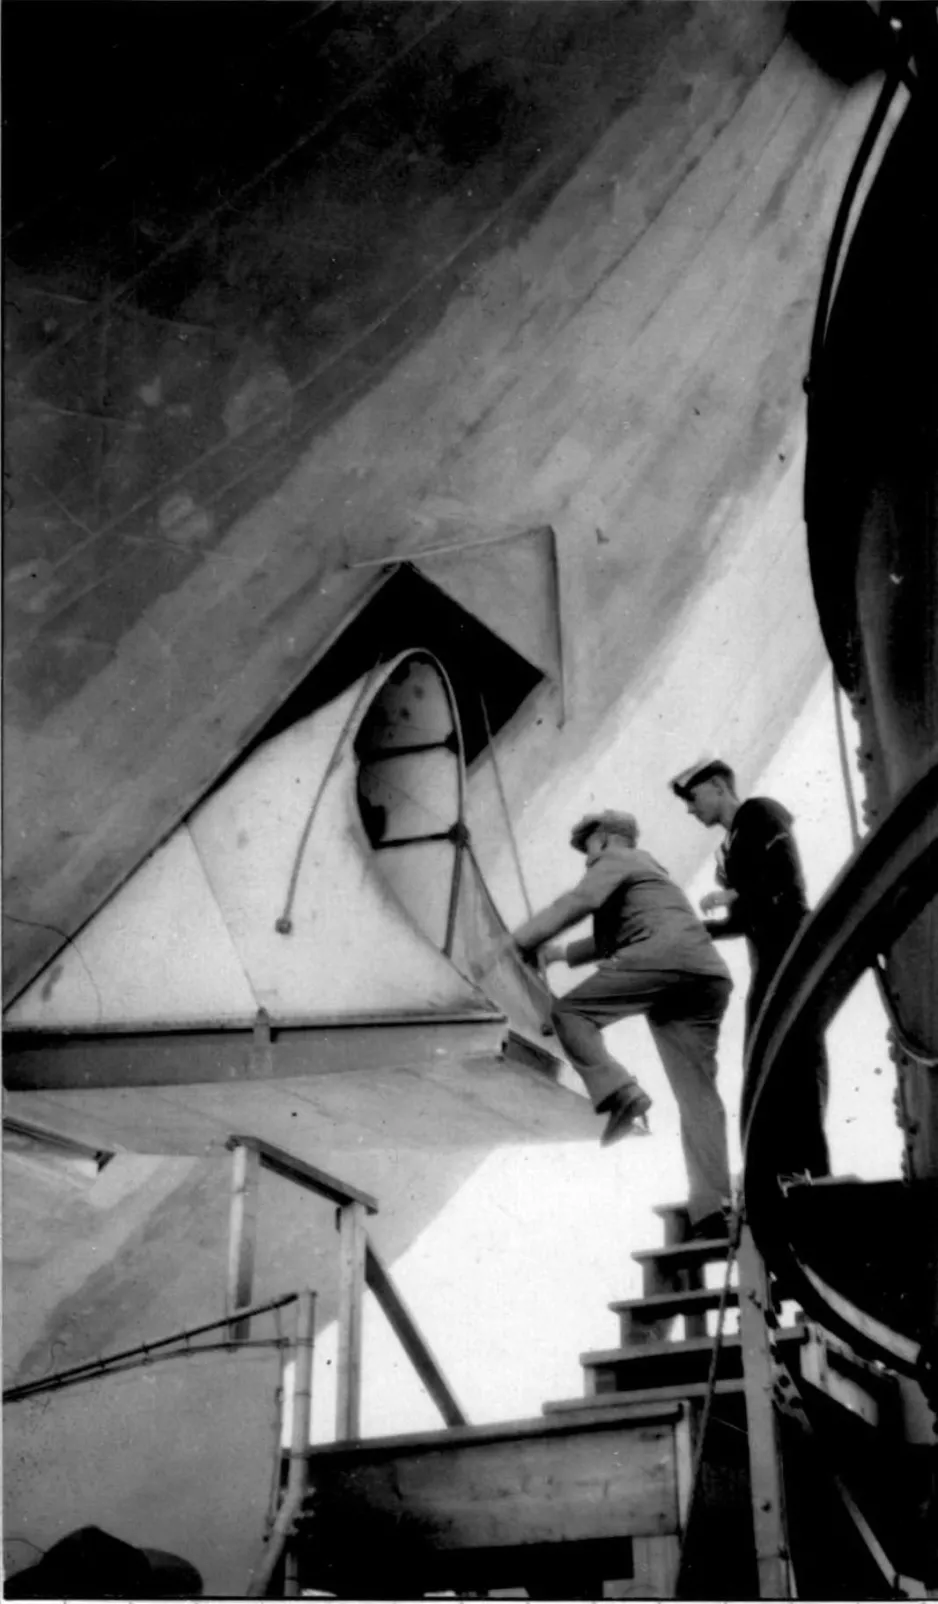 A black and white photograph of a man climbing onto the entrance of the R-100 airship from a set of stairs. The gap is approximately 1 metre tall. Another man stands behind him.